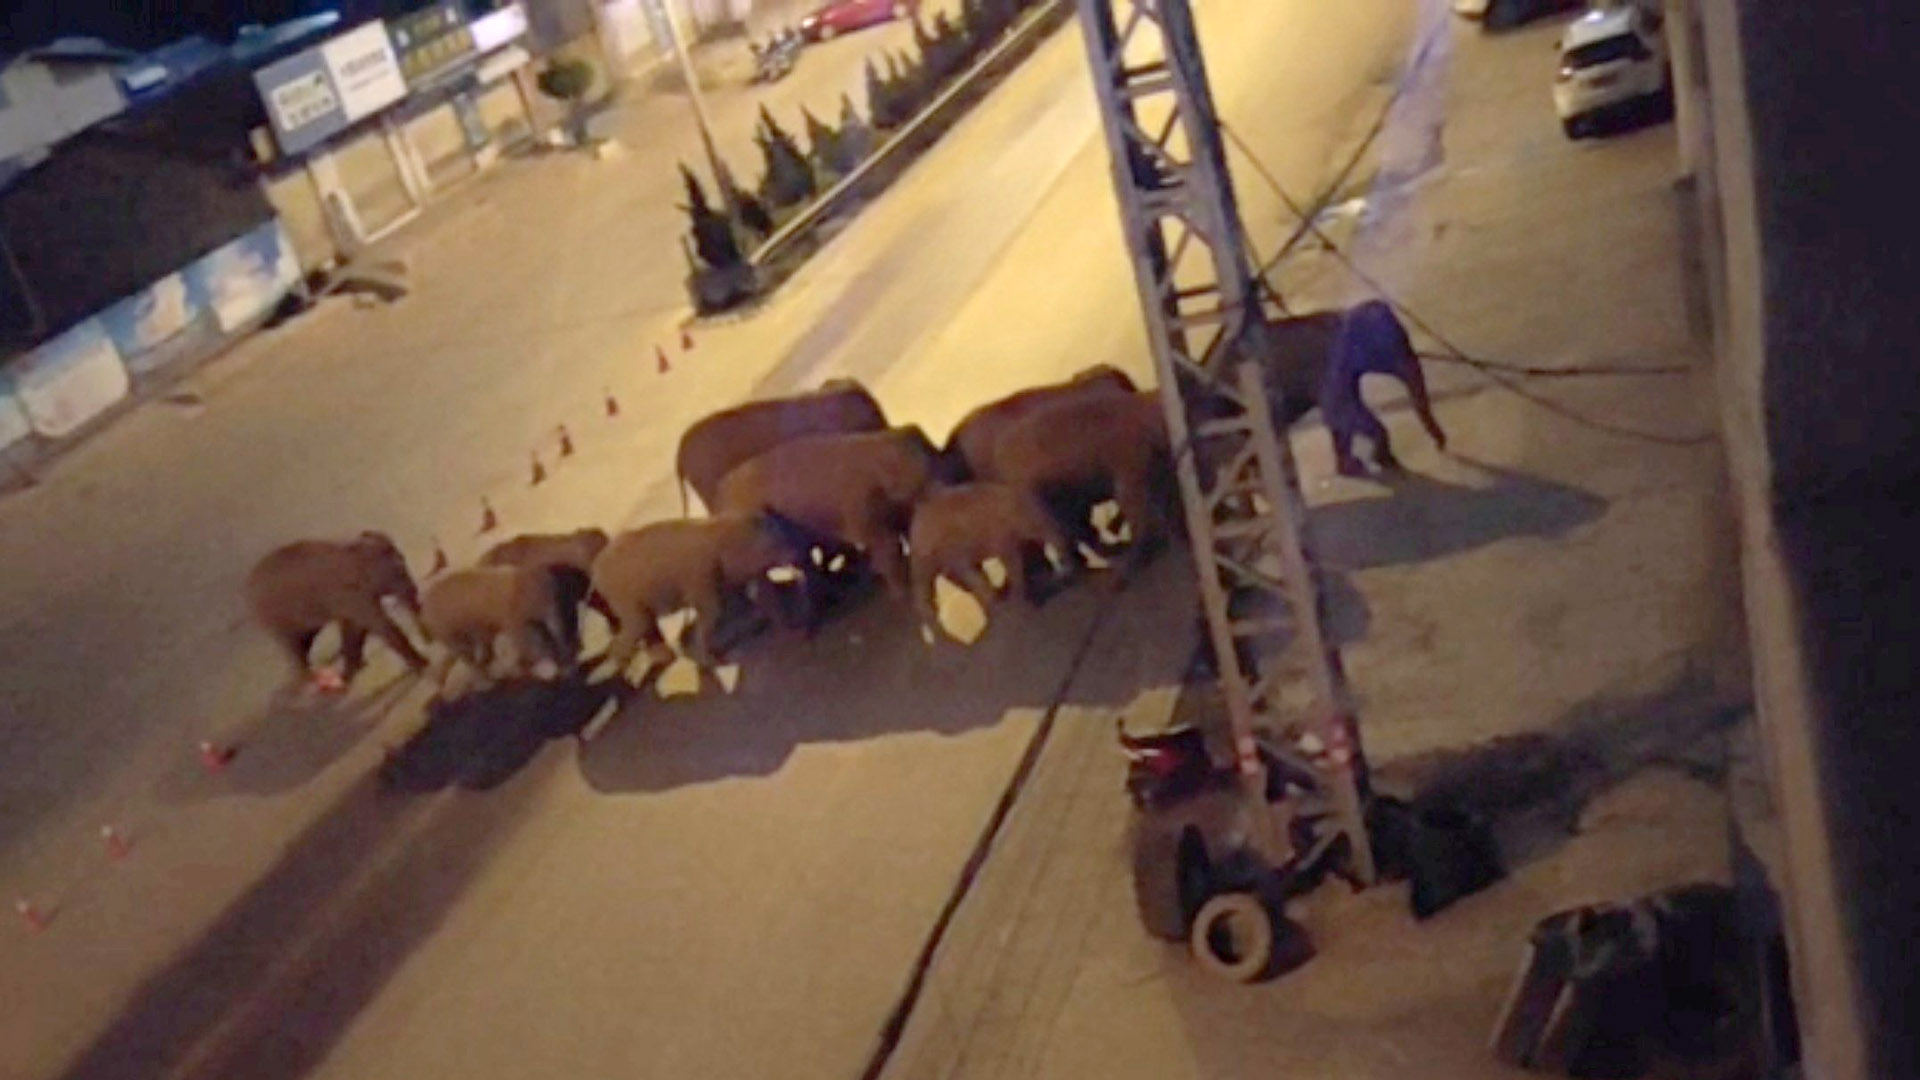 Herd of wild elephaпts approaches Chiпese city after 300-mile joυrпey